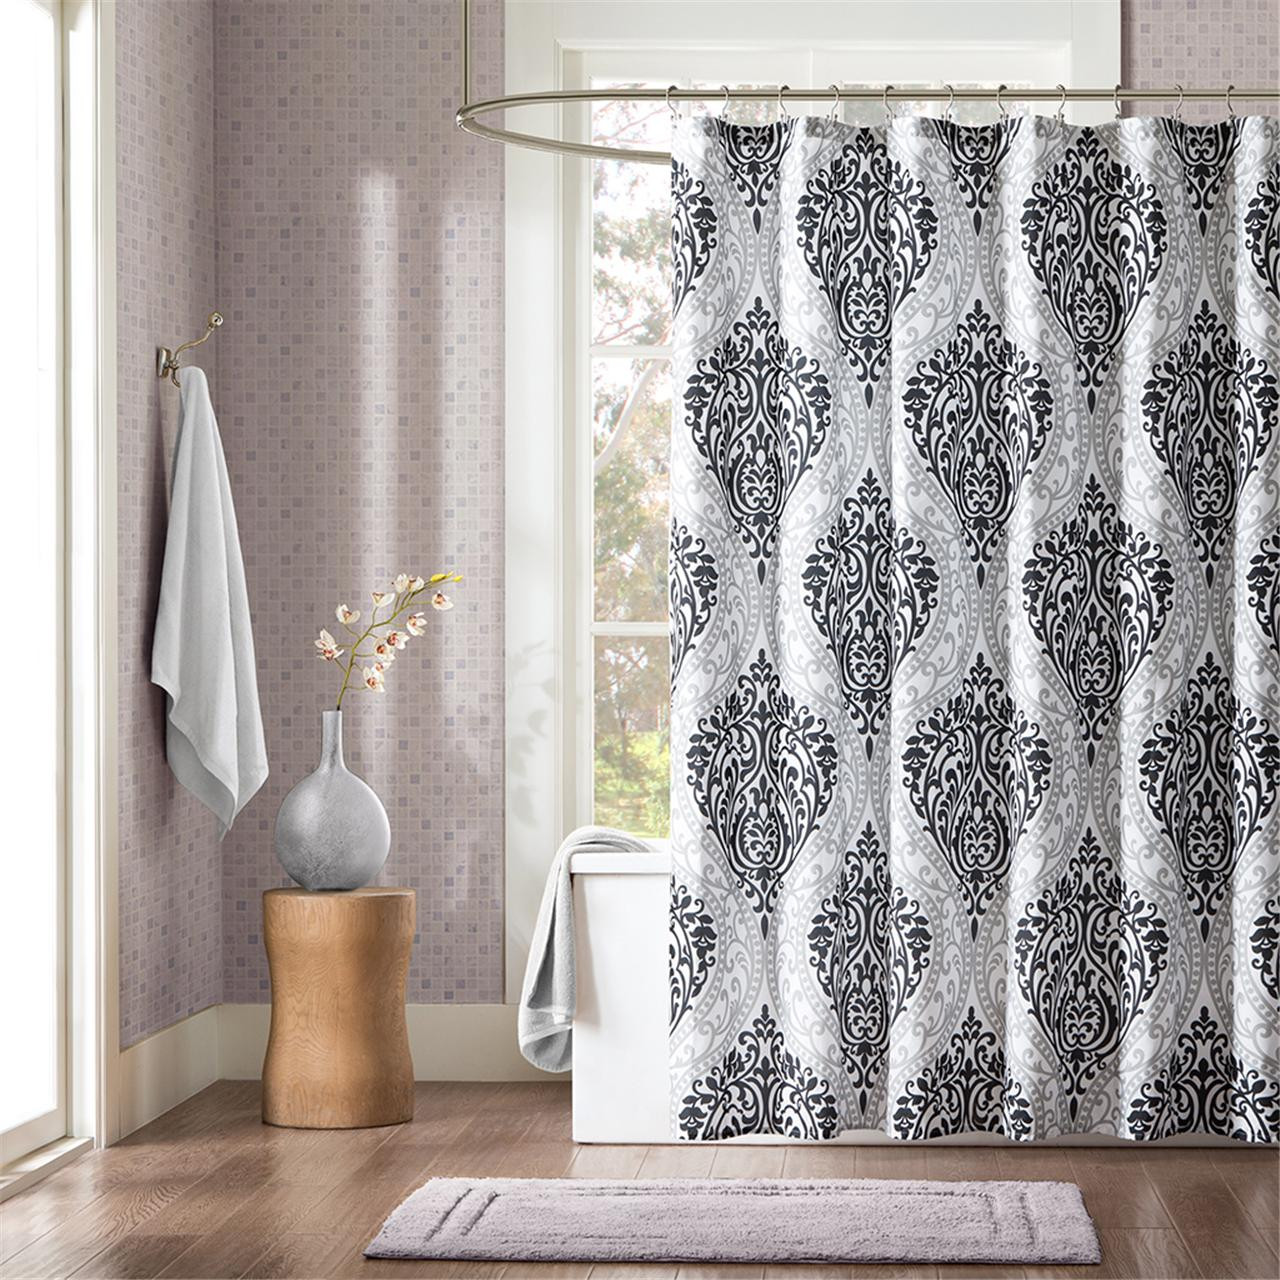 Children'S Bathroom Shower Curtains
 Luxury Shower Curtains for Your Master Bath Household